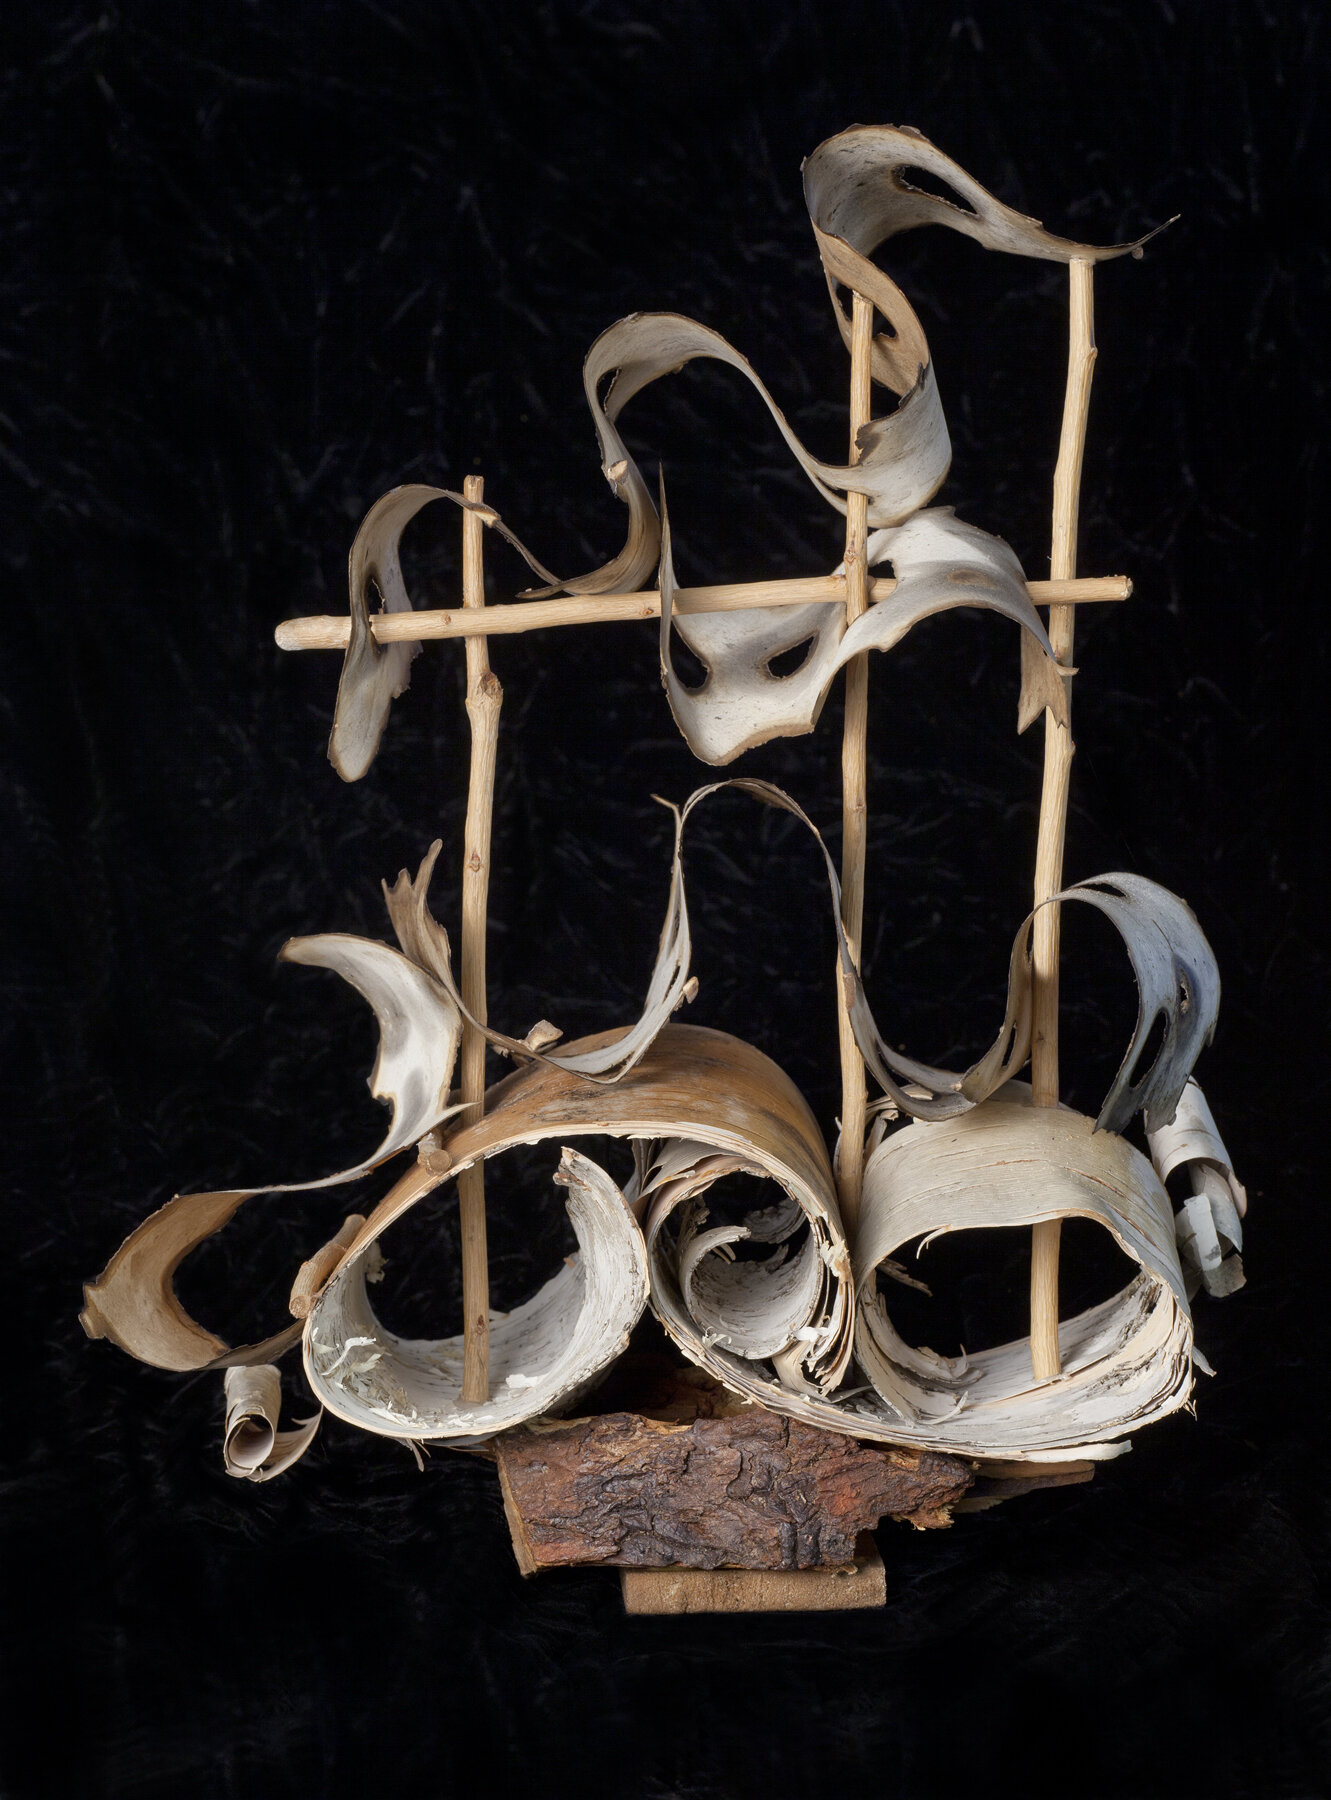    Voyage 3   wood, twigs, burnt paper, 17 x 14 x 8 inches 